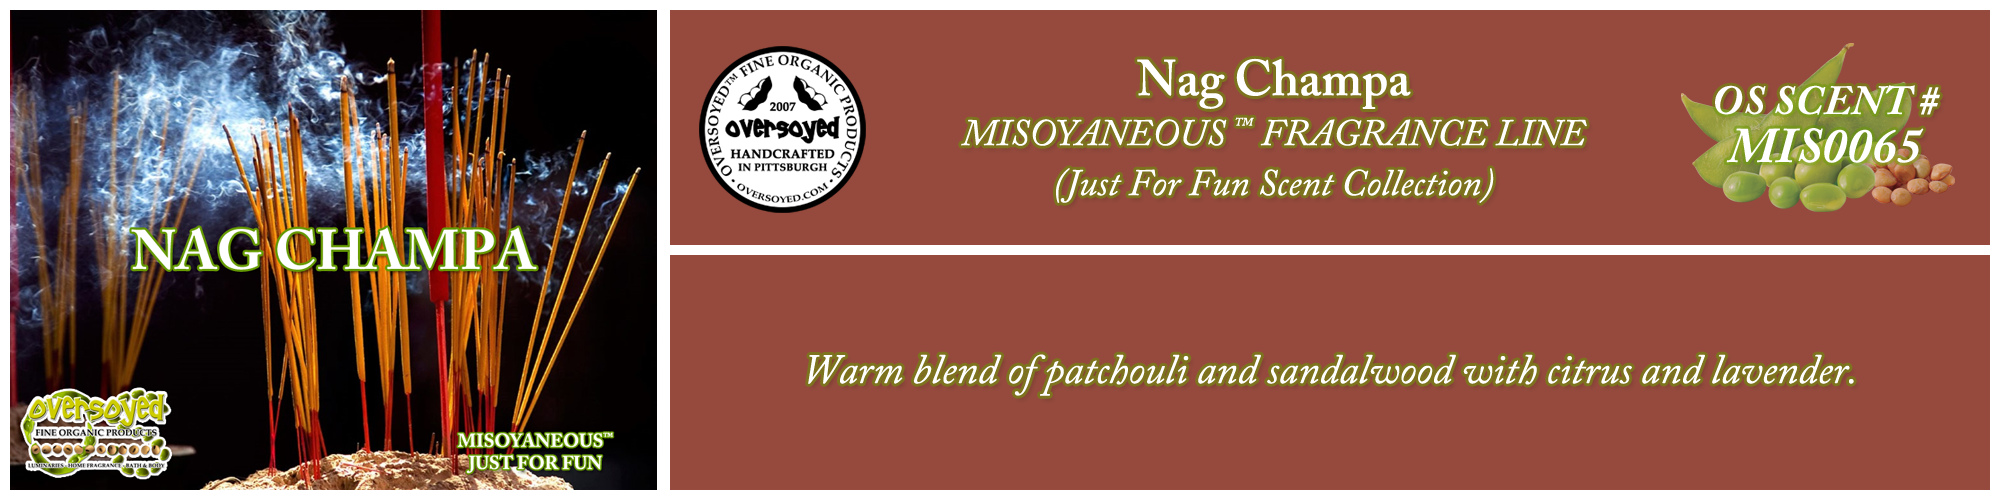 Nag Champa Handcrafted Products Collection